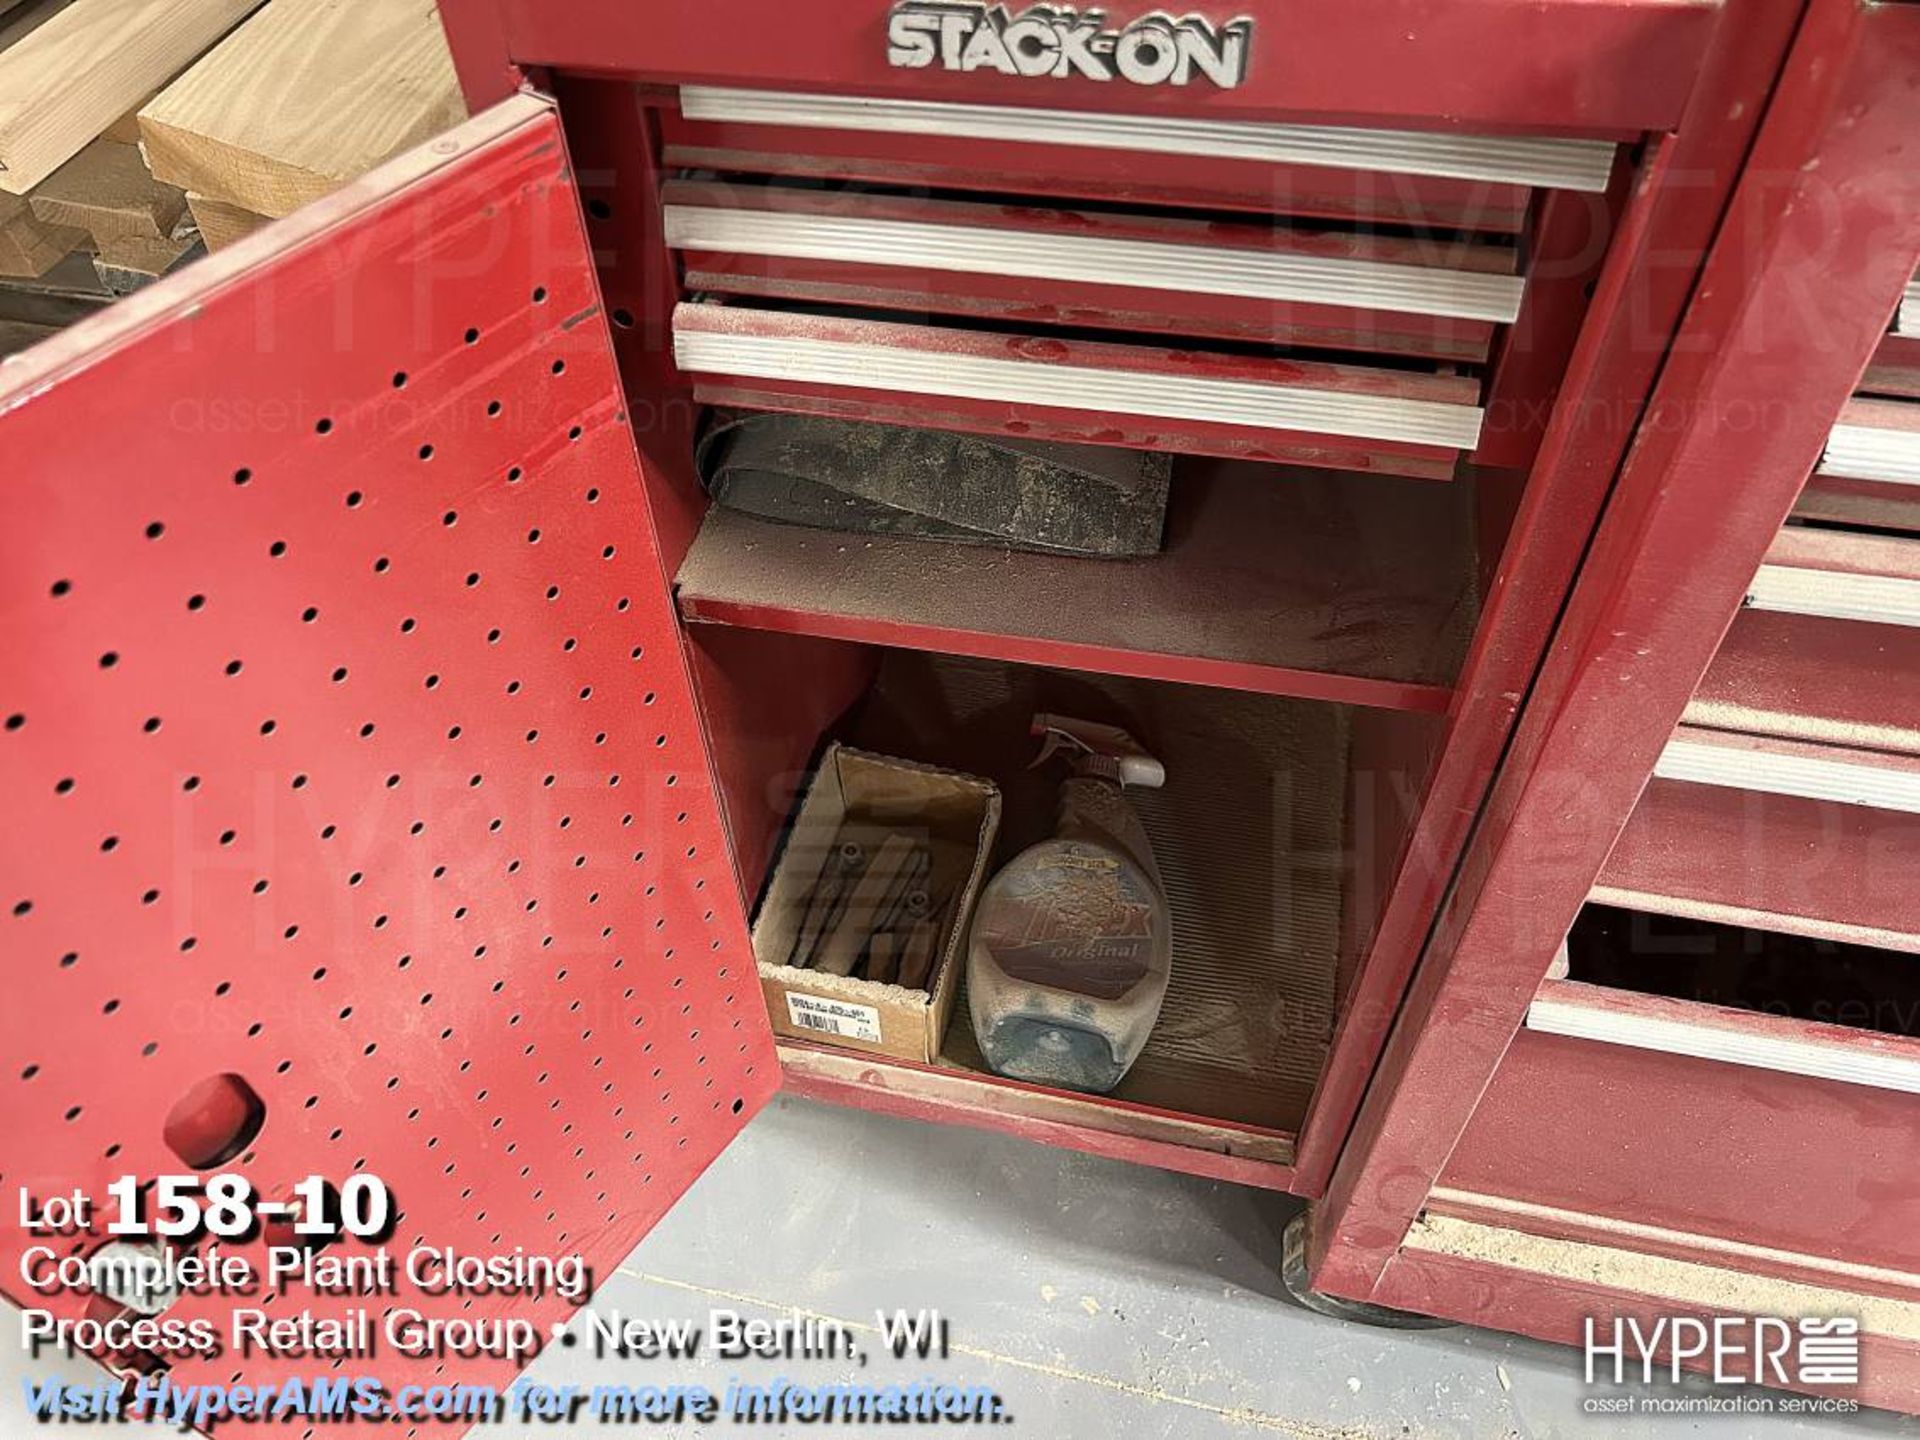 Stack on Professional series toolbox - Image 10 of 10